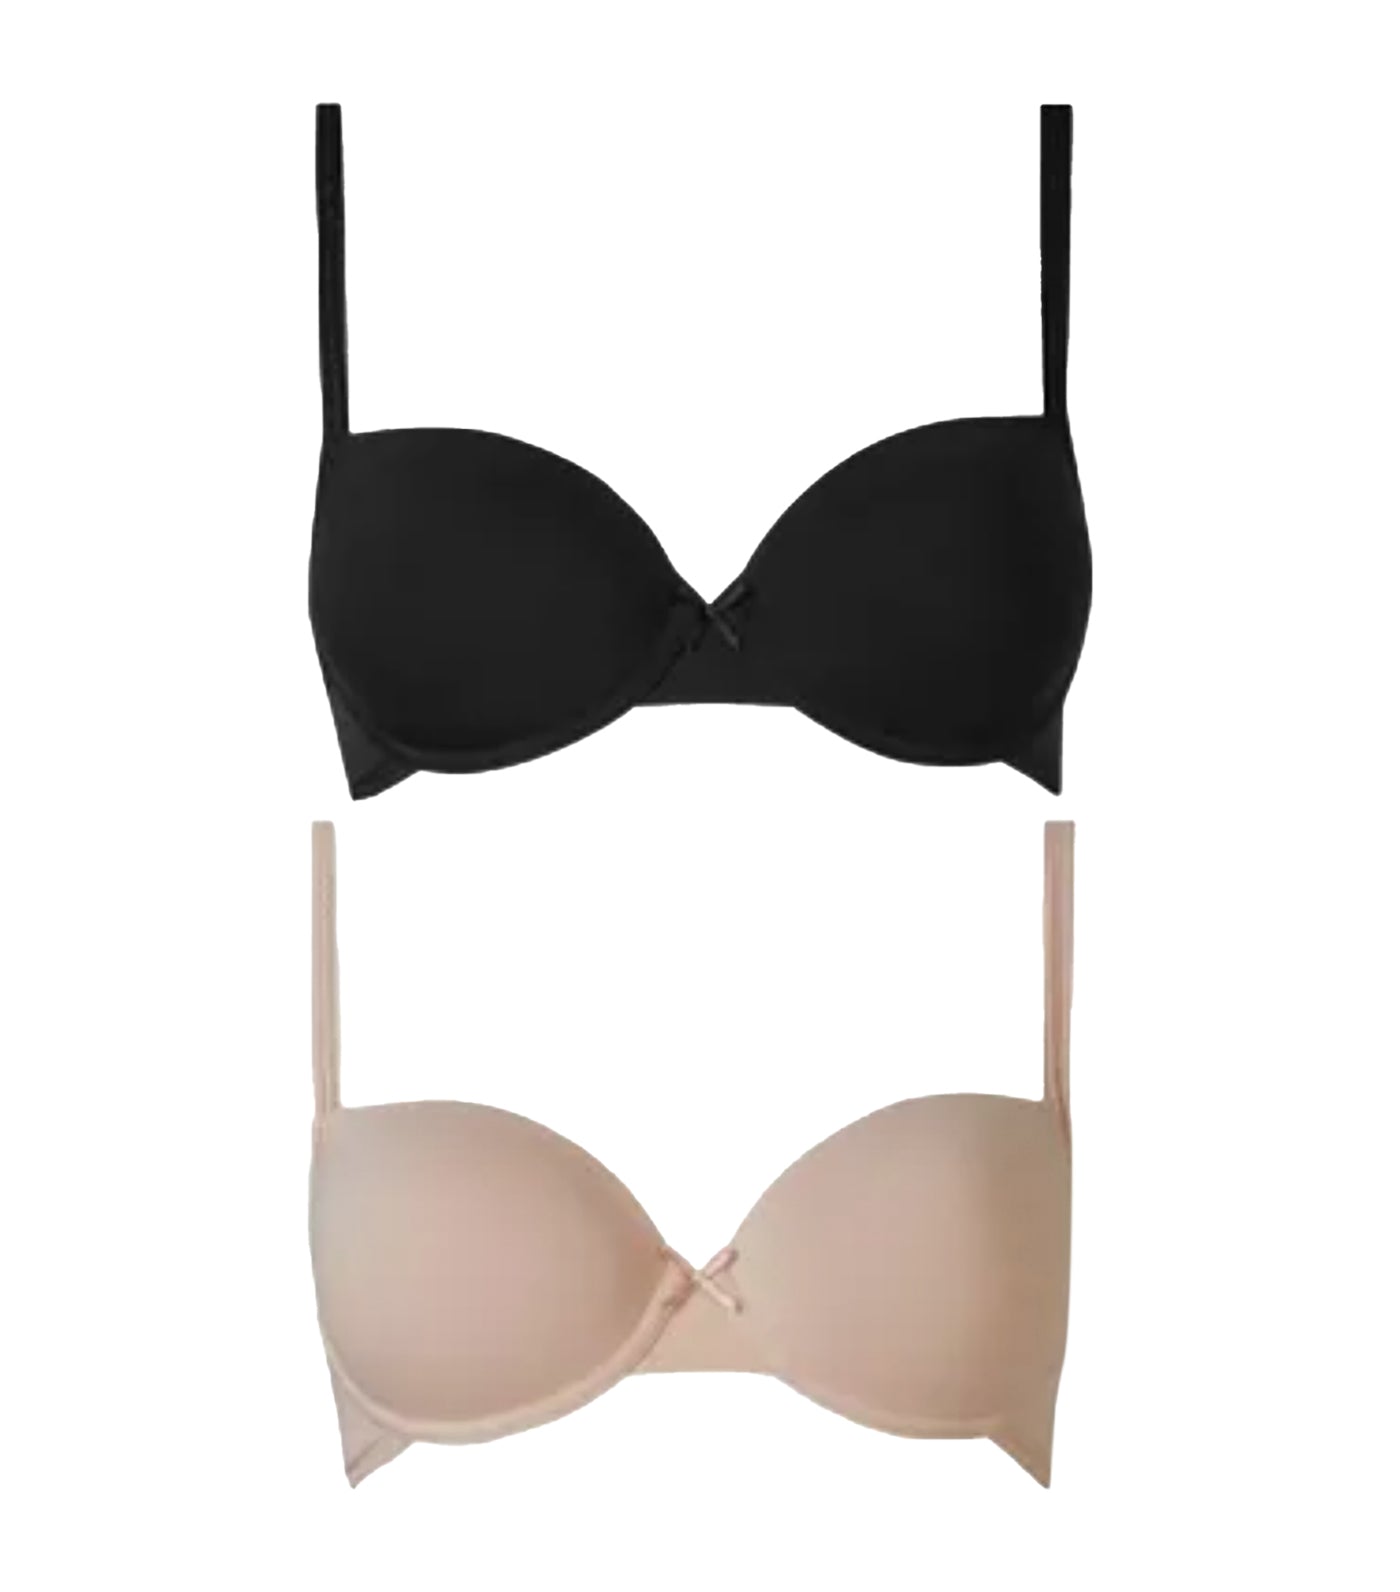 marks and spencer 2pj cotton rich underwired balcony bras - black and beige